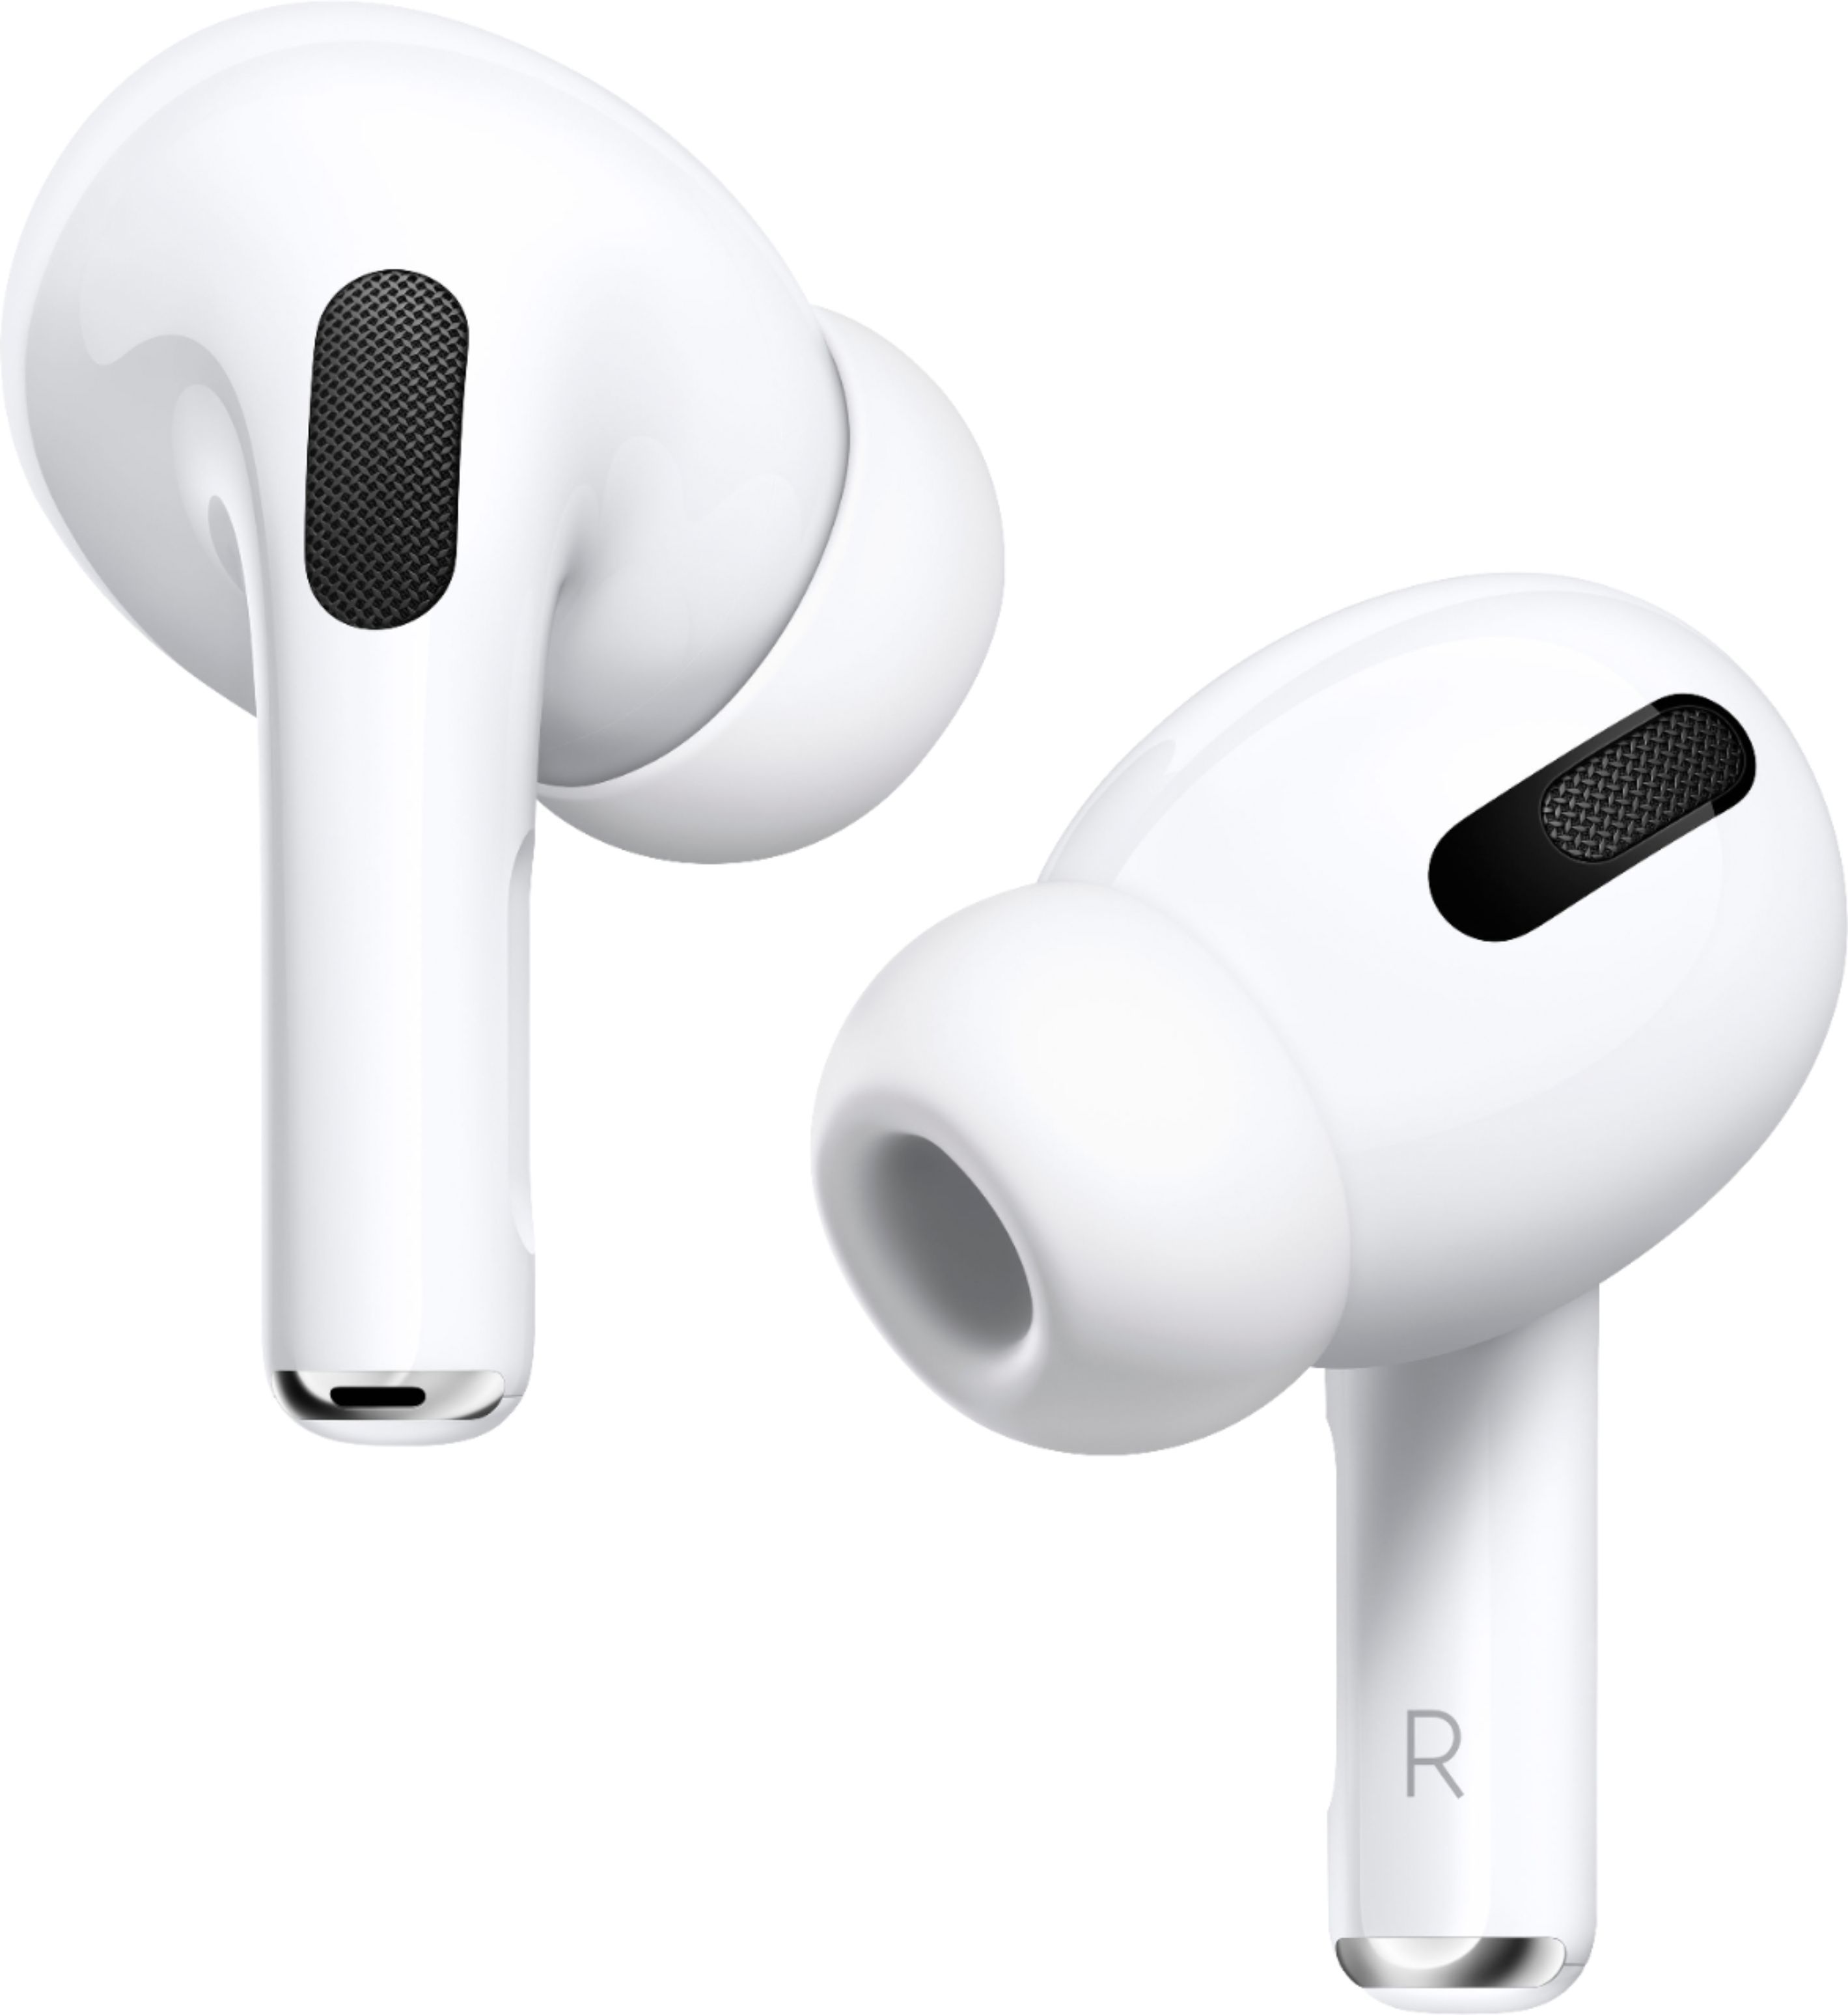 Apple AirPods Pro (with Wireless Charging Case) White MWP22AM/A - Best Buy | Best Buy U.S.